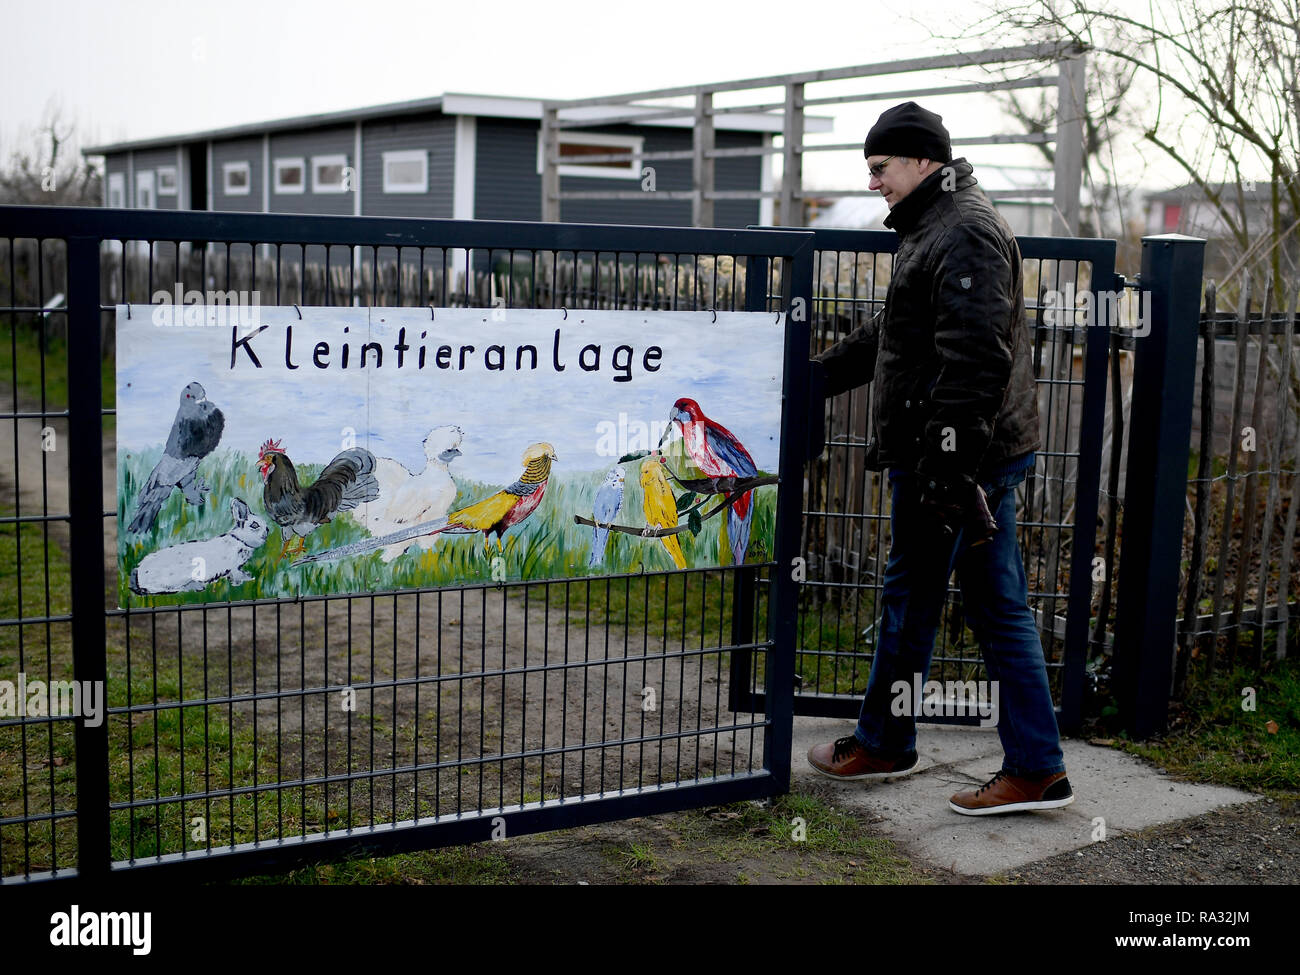 Berlin, Germany. 20th Dec, 2018. Burkhard Träder, chairman of the allotment garden 'Am Kienberg', walks through the park. Due to the housing shortage in large cities, allotment garden complexes are repeatedly being targeted by investors who want to build housing there. According to experts, allotment gardeners will have to become more flexible in the future if they are to maintain their facilities in conurbations in the long term. Credit: Britta Pedersen/dpa-Zentralbild/ZB/dpa/Alamy Live News Stock Photo